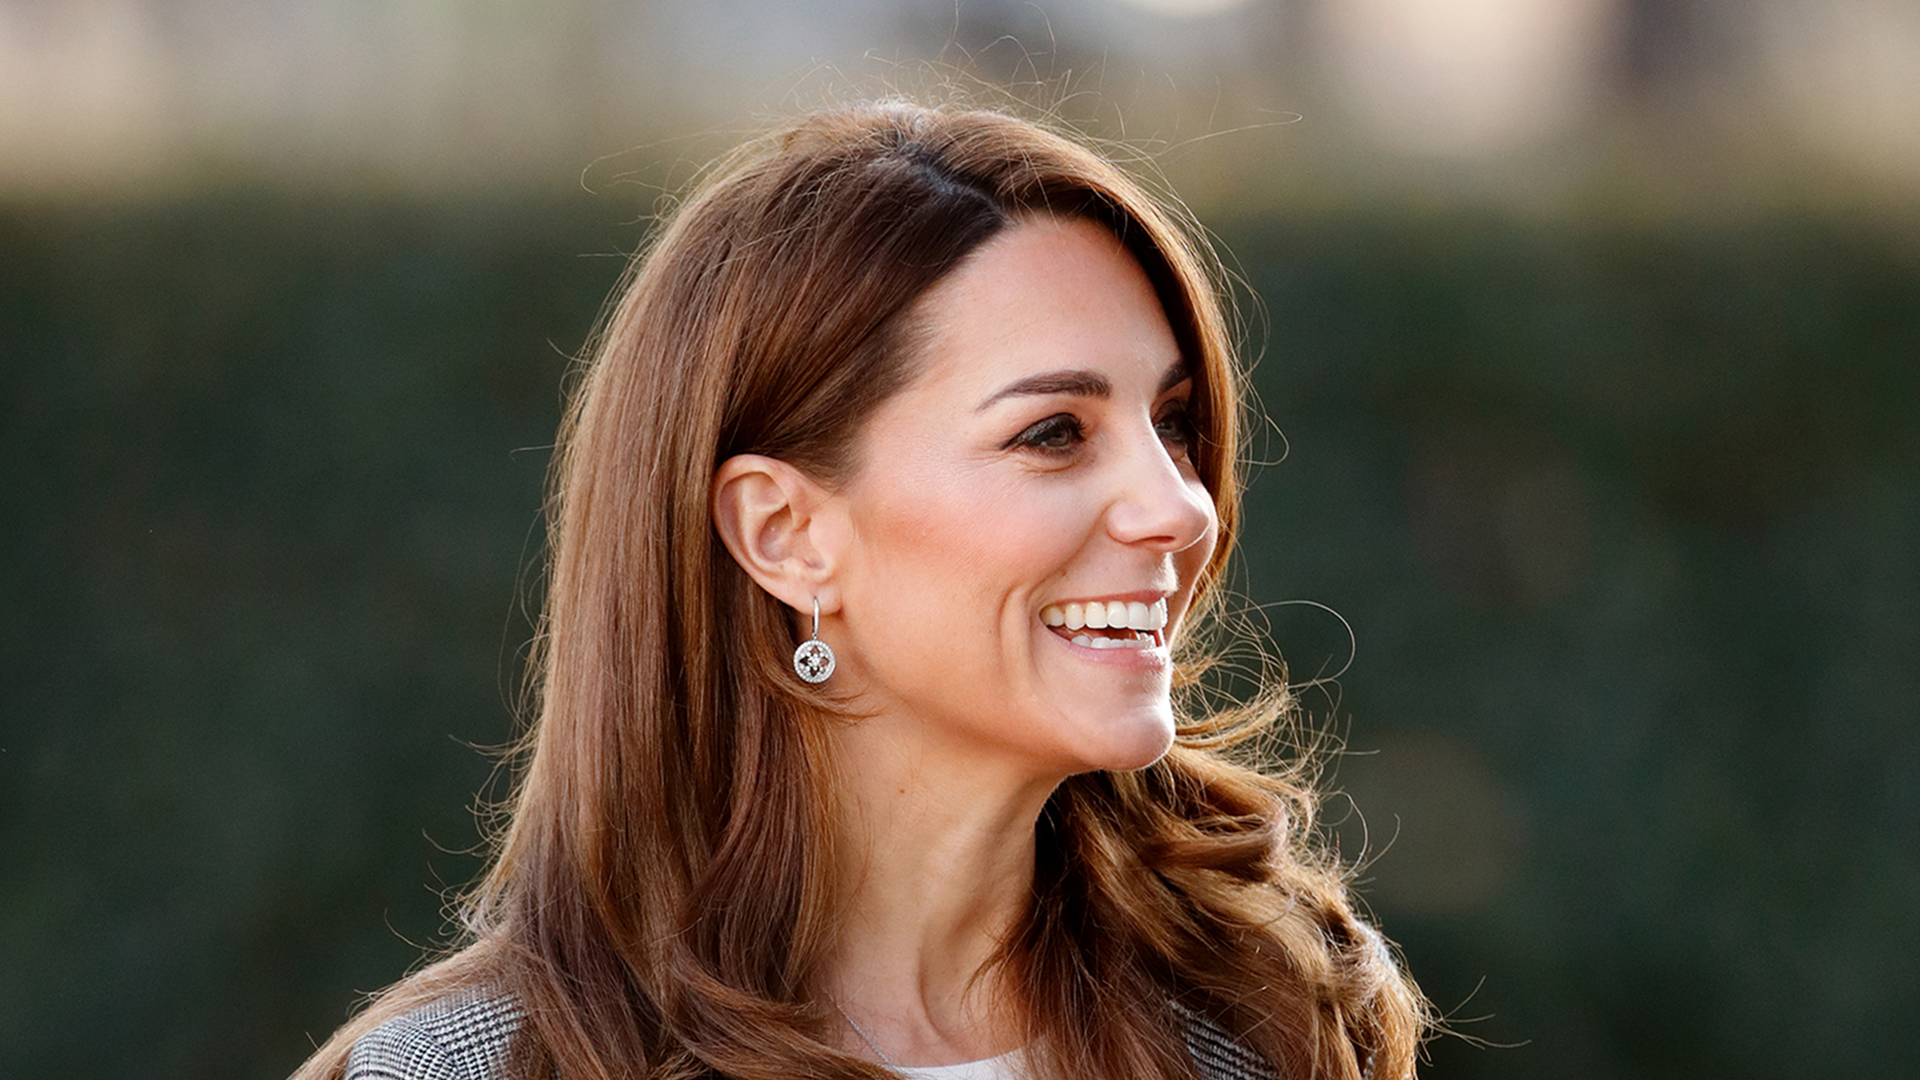 Kate Middleton's hair transformation, plus how she styles it | Woman & Home